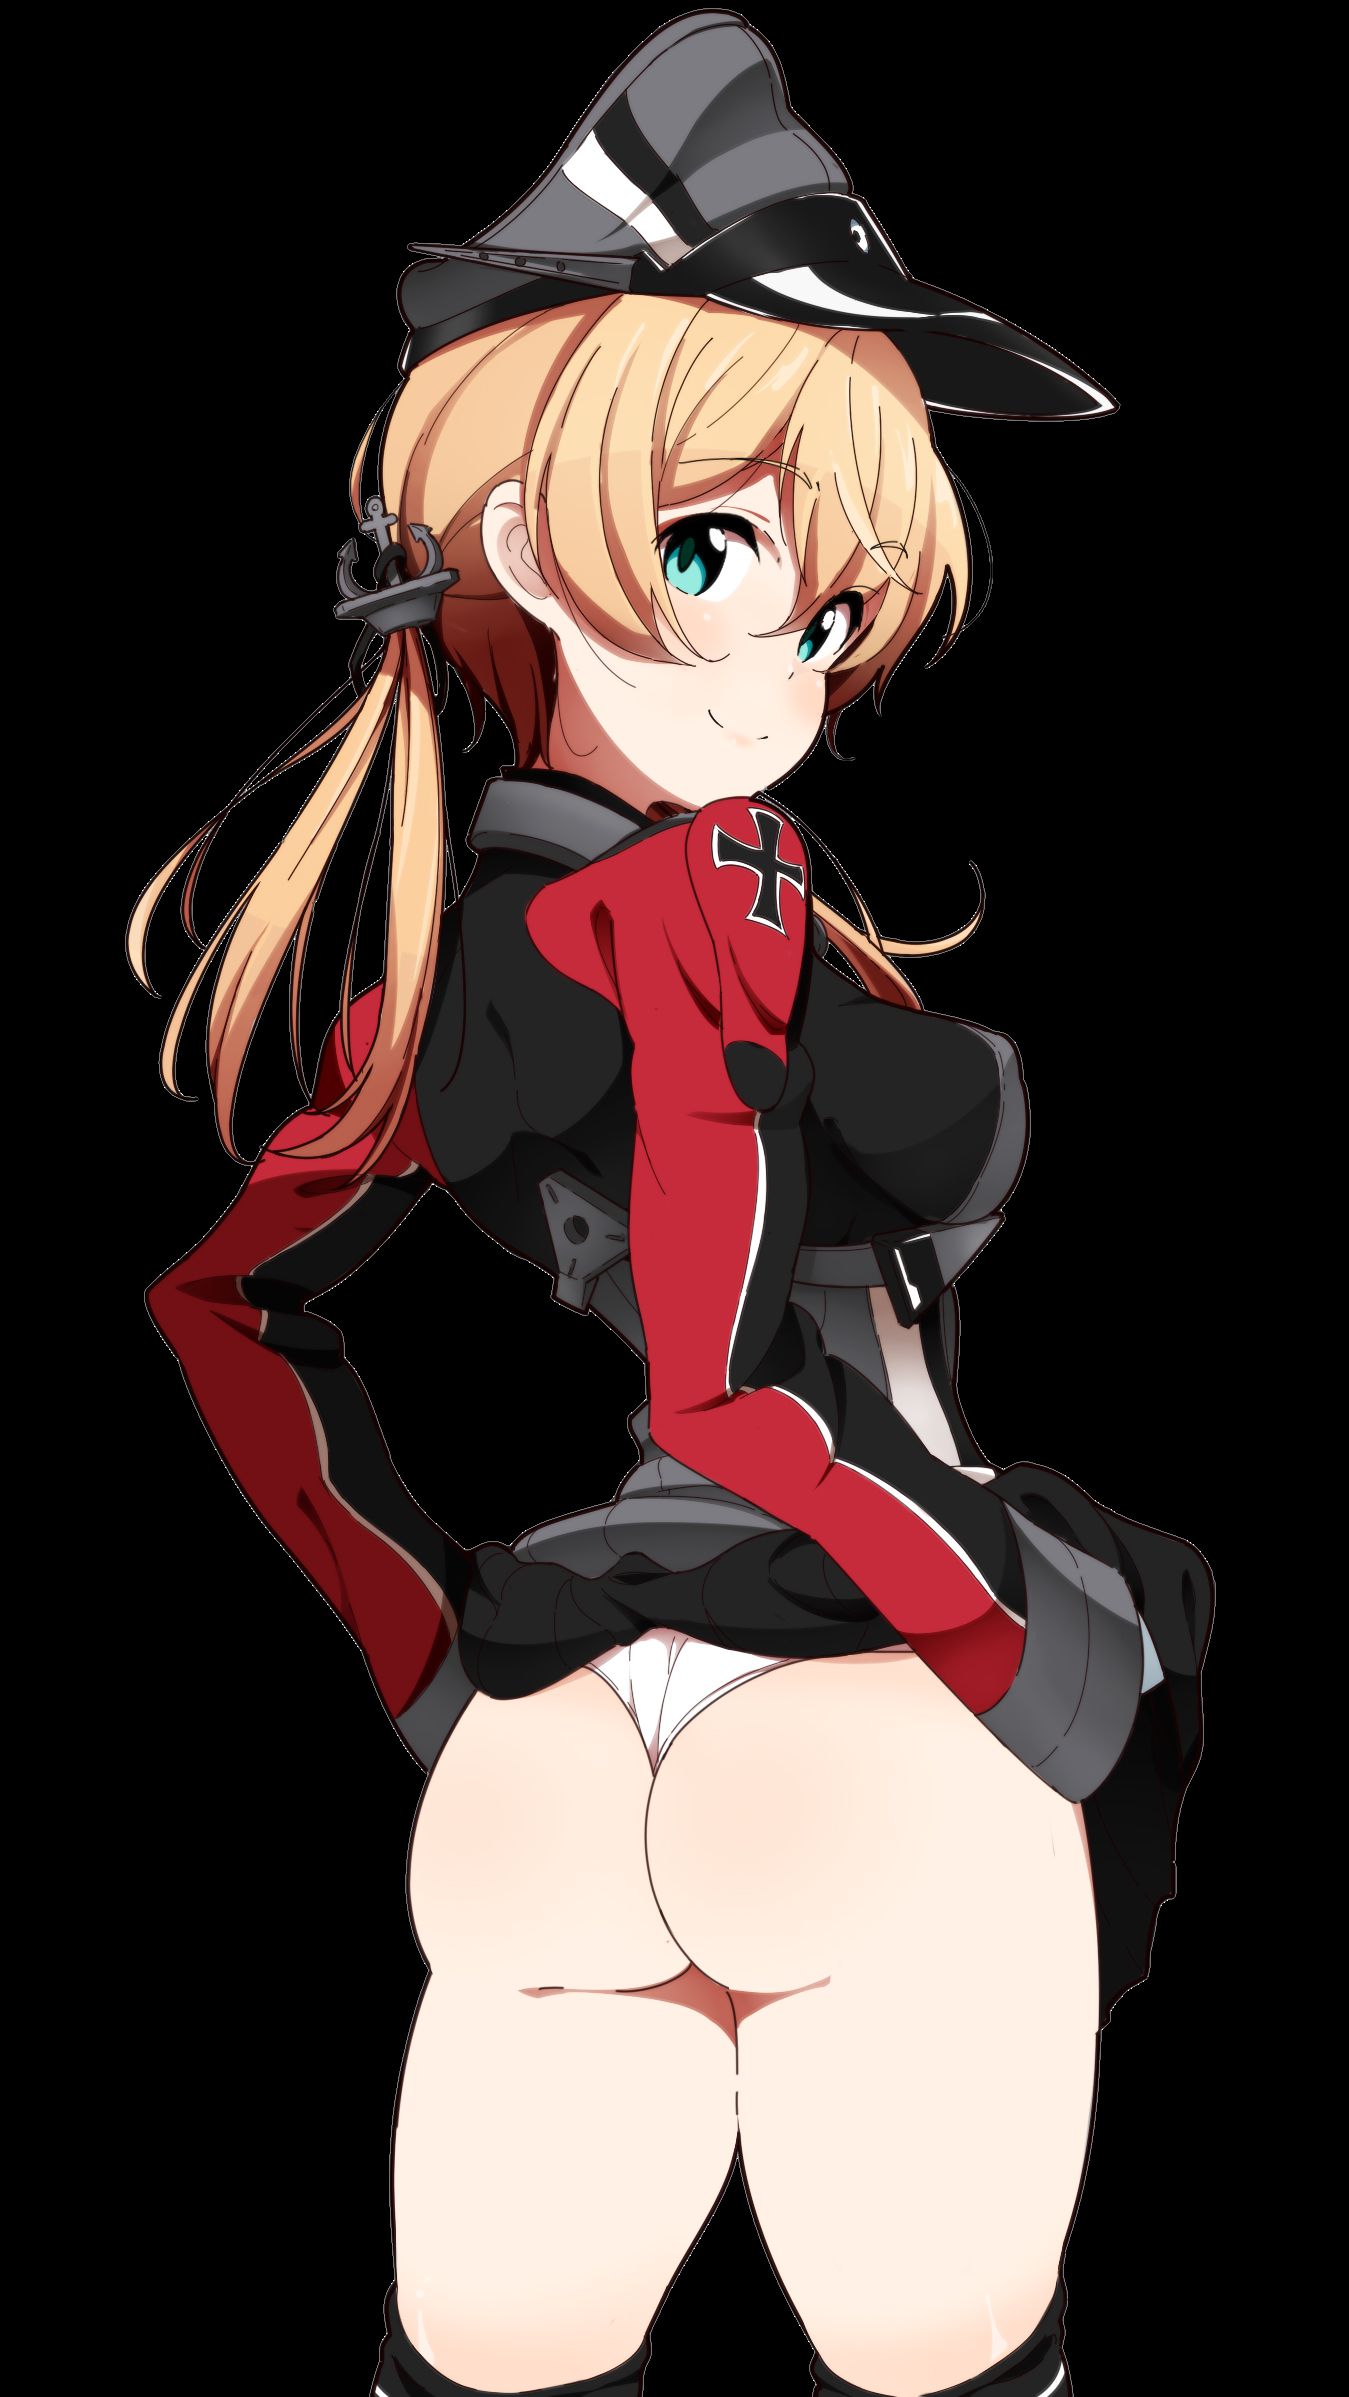 [Erocola Character Material] PNG background transparent erotic image material, such as anime characters Part 263 36